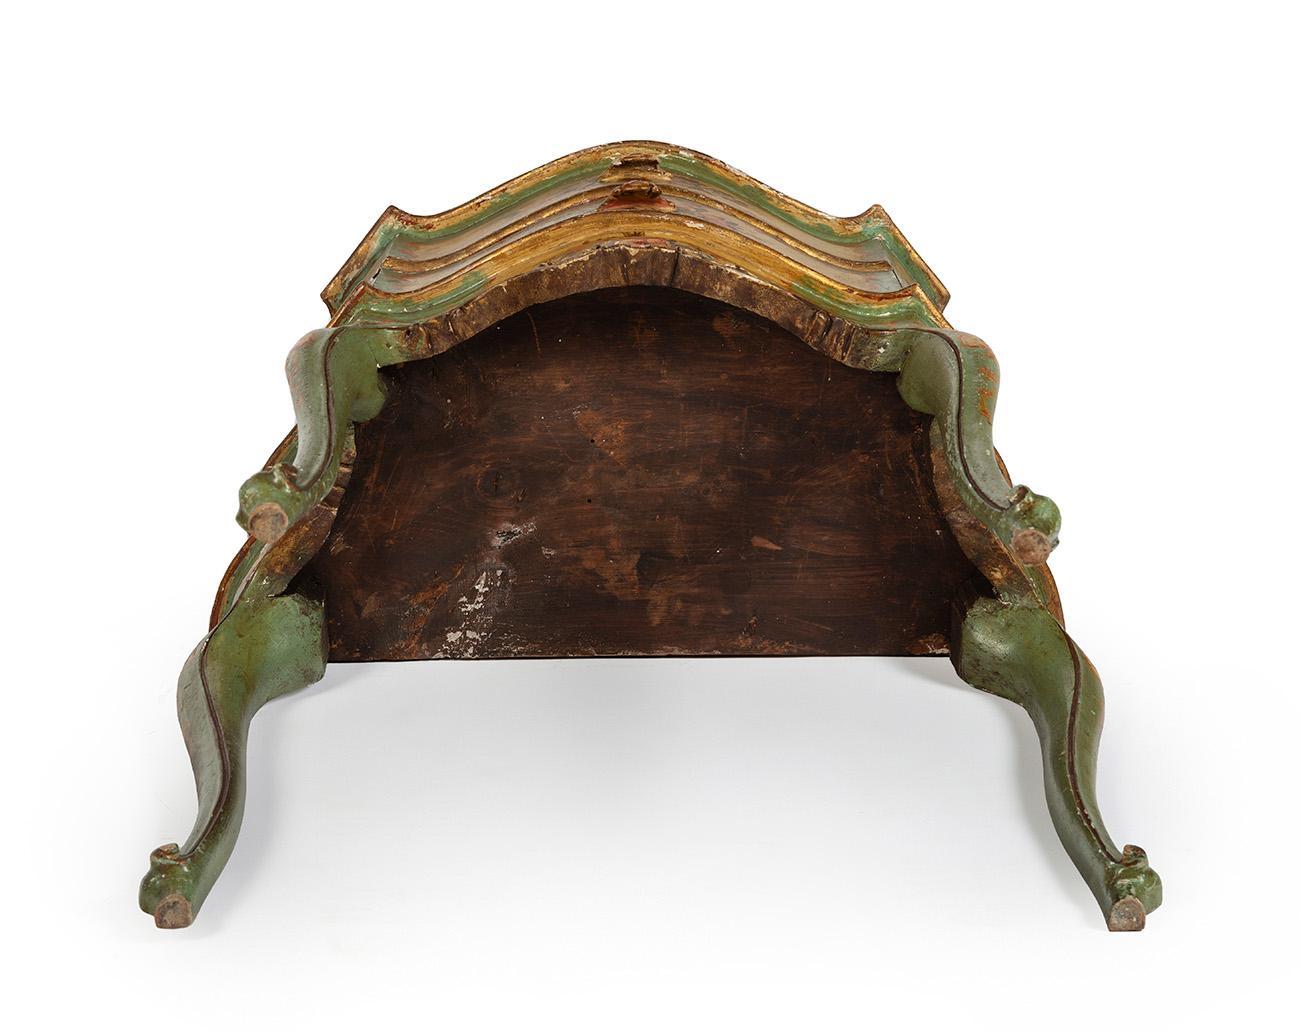 Early 20th Century Intricate and Beautiful Antique Hand-Painted Small Commode in Rococo Manner